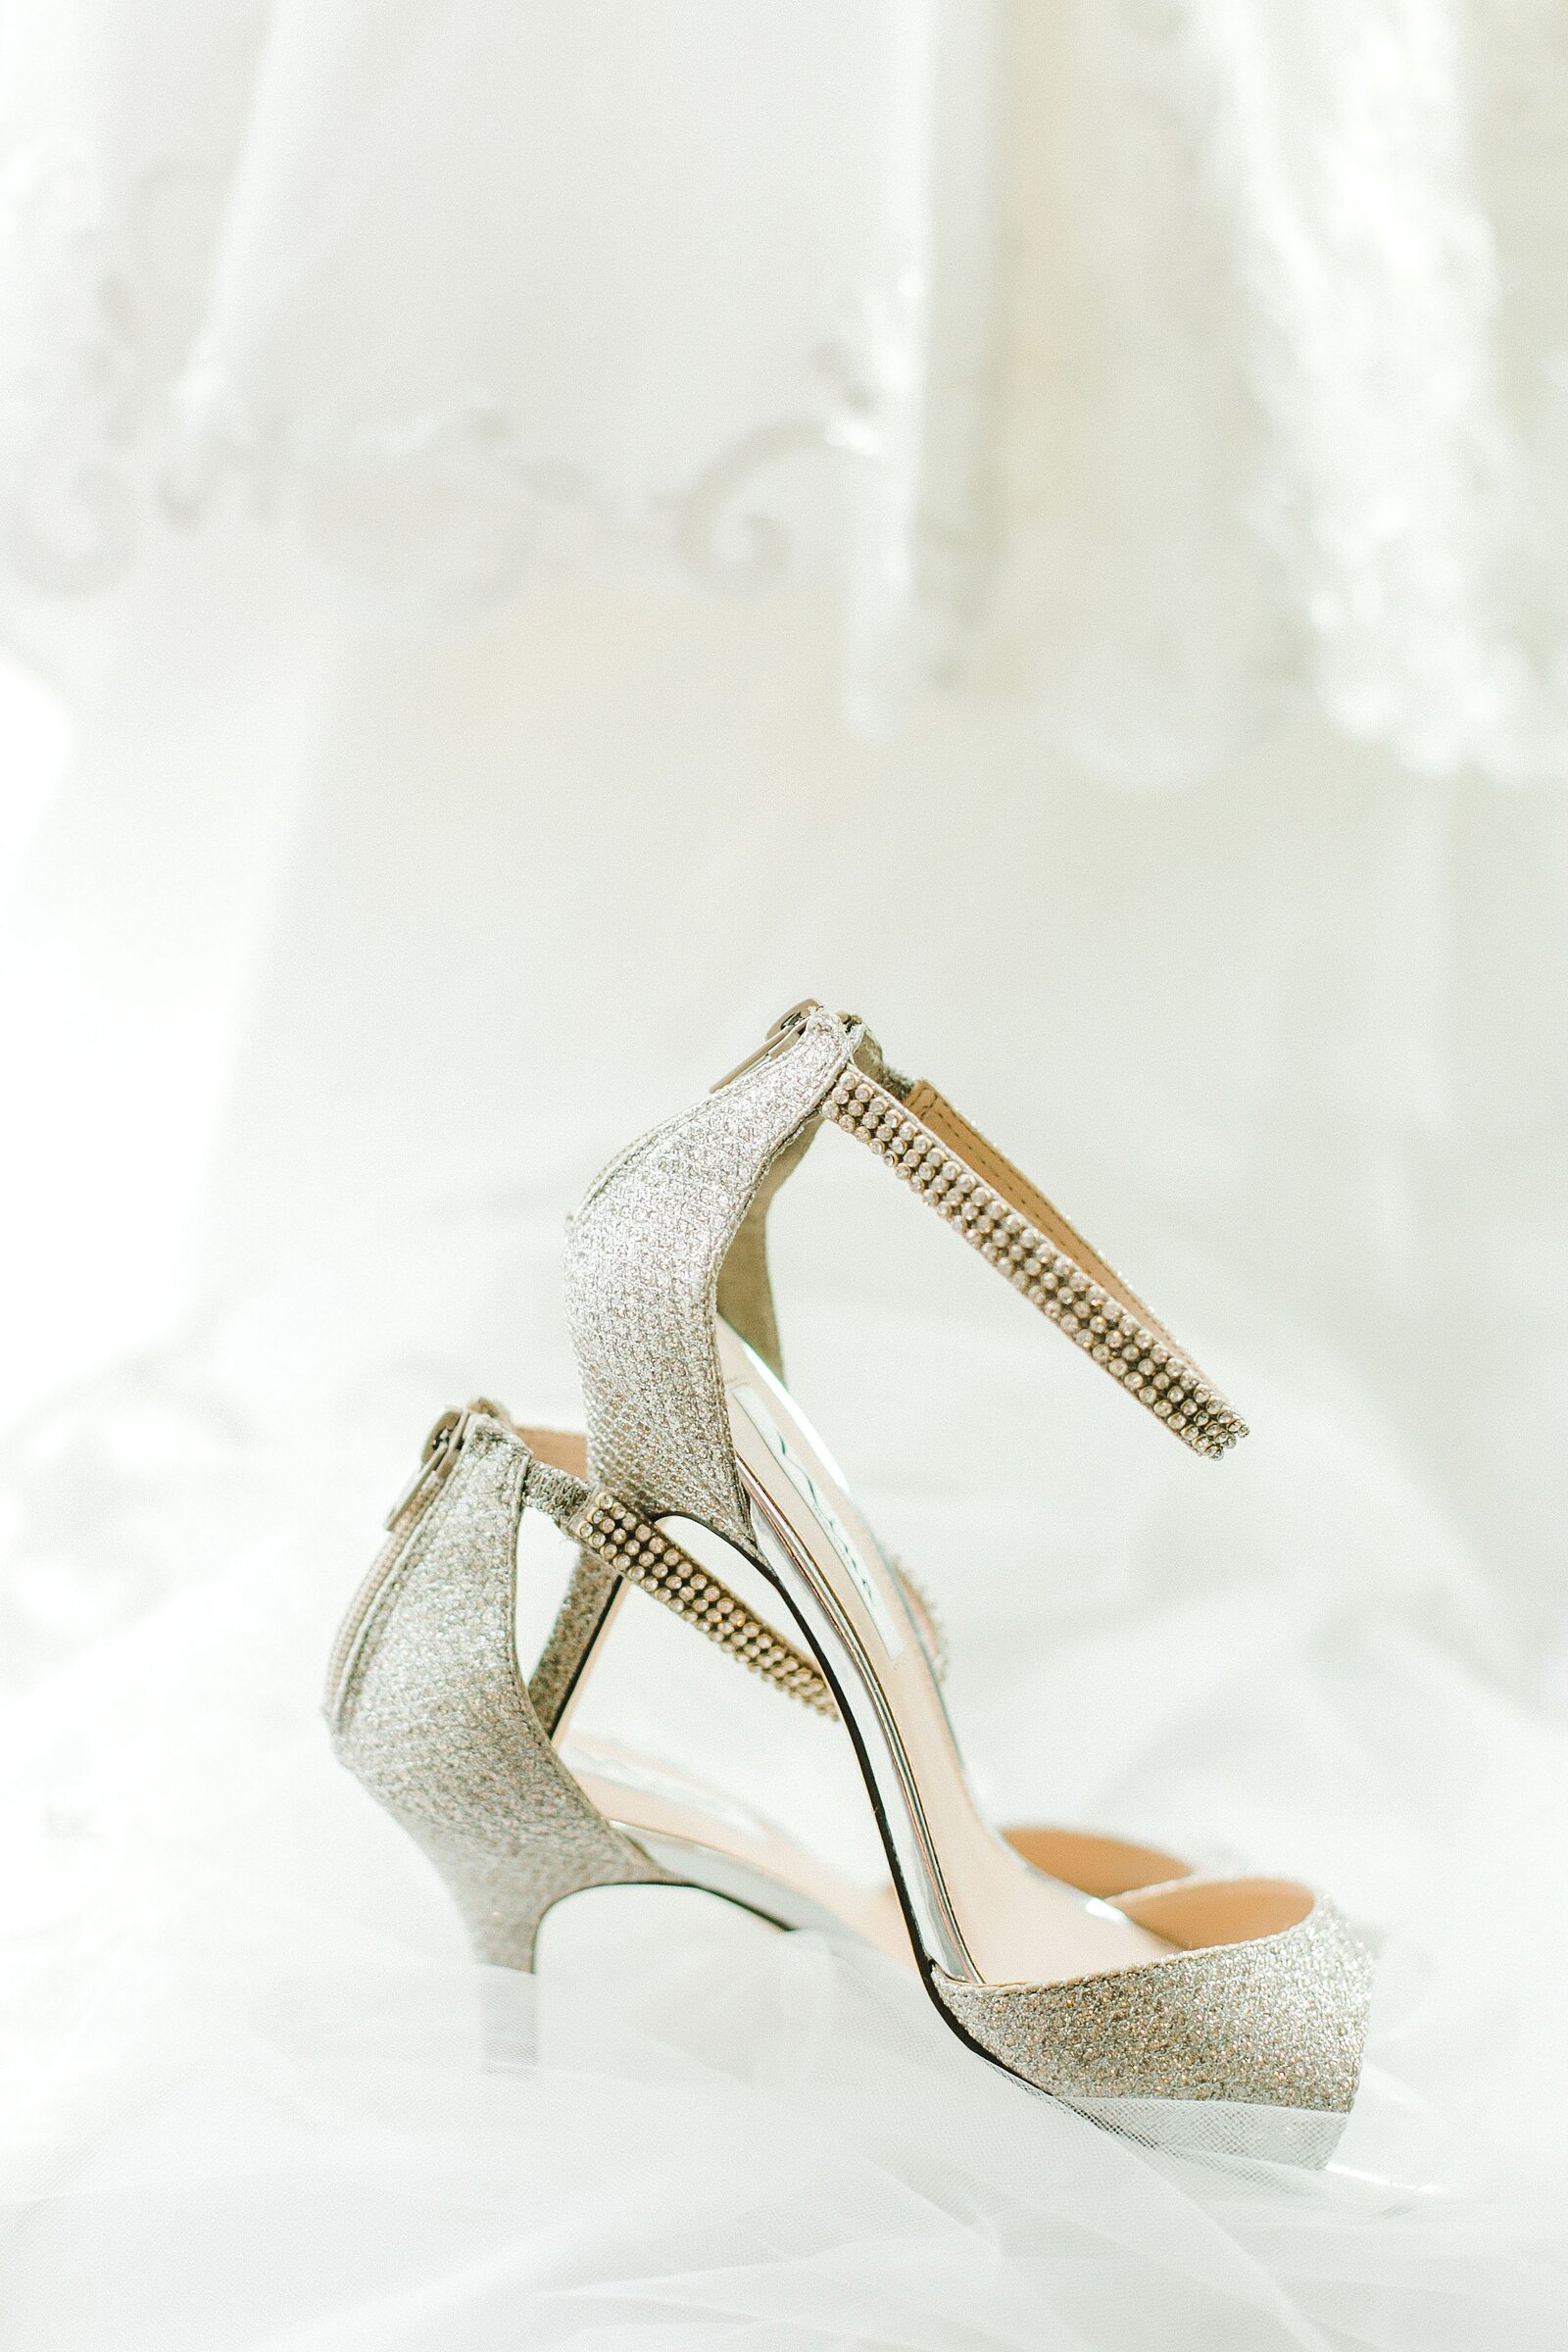 WEDDING DAY SHOE PICTURES